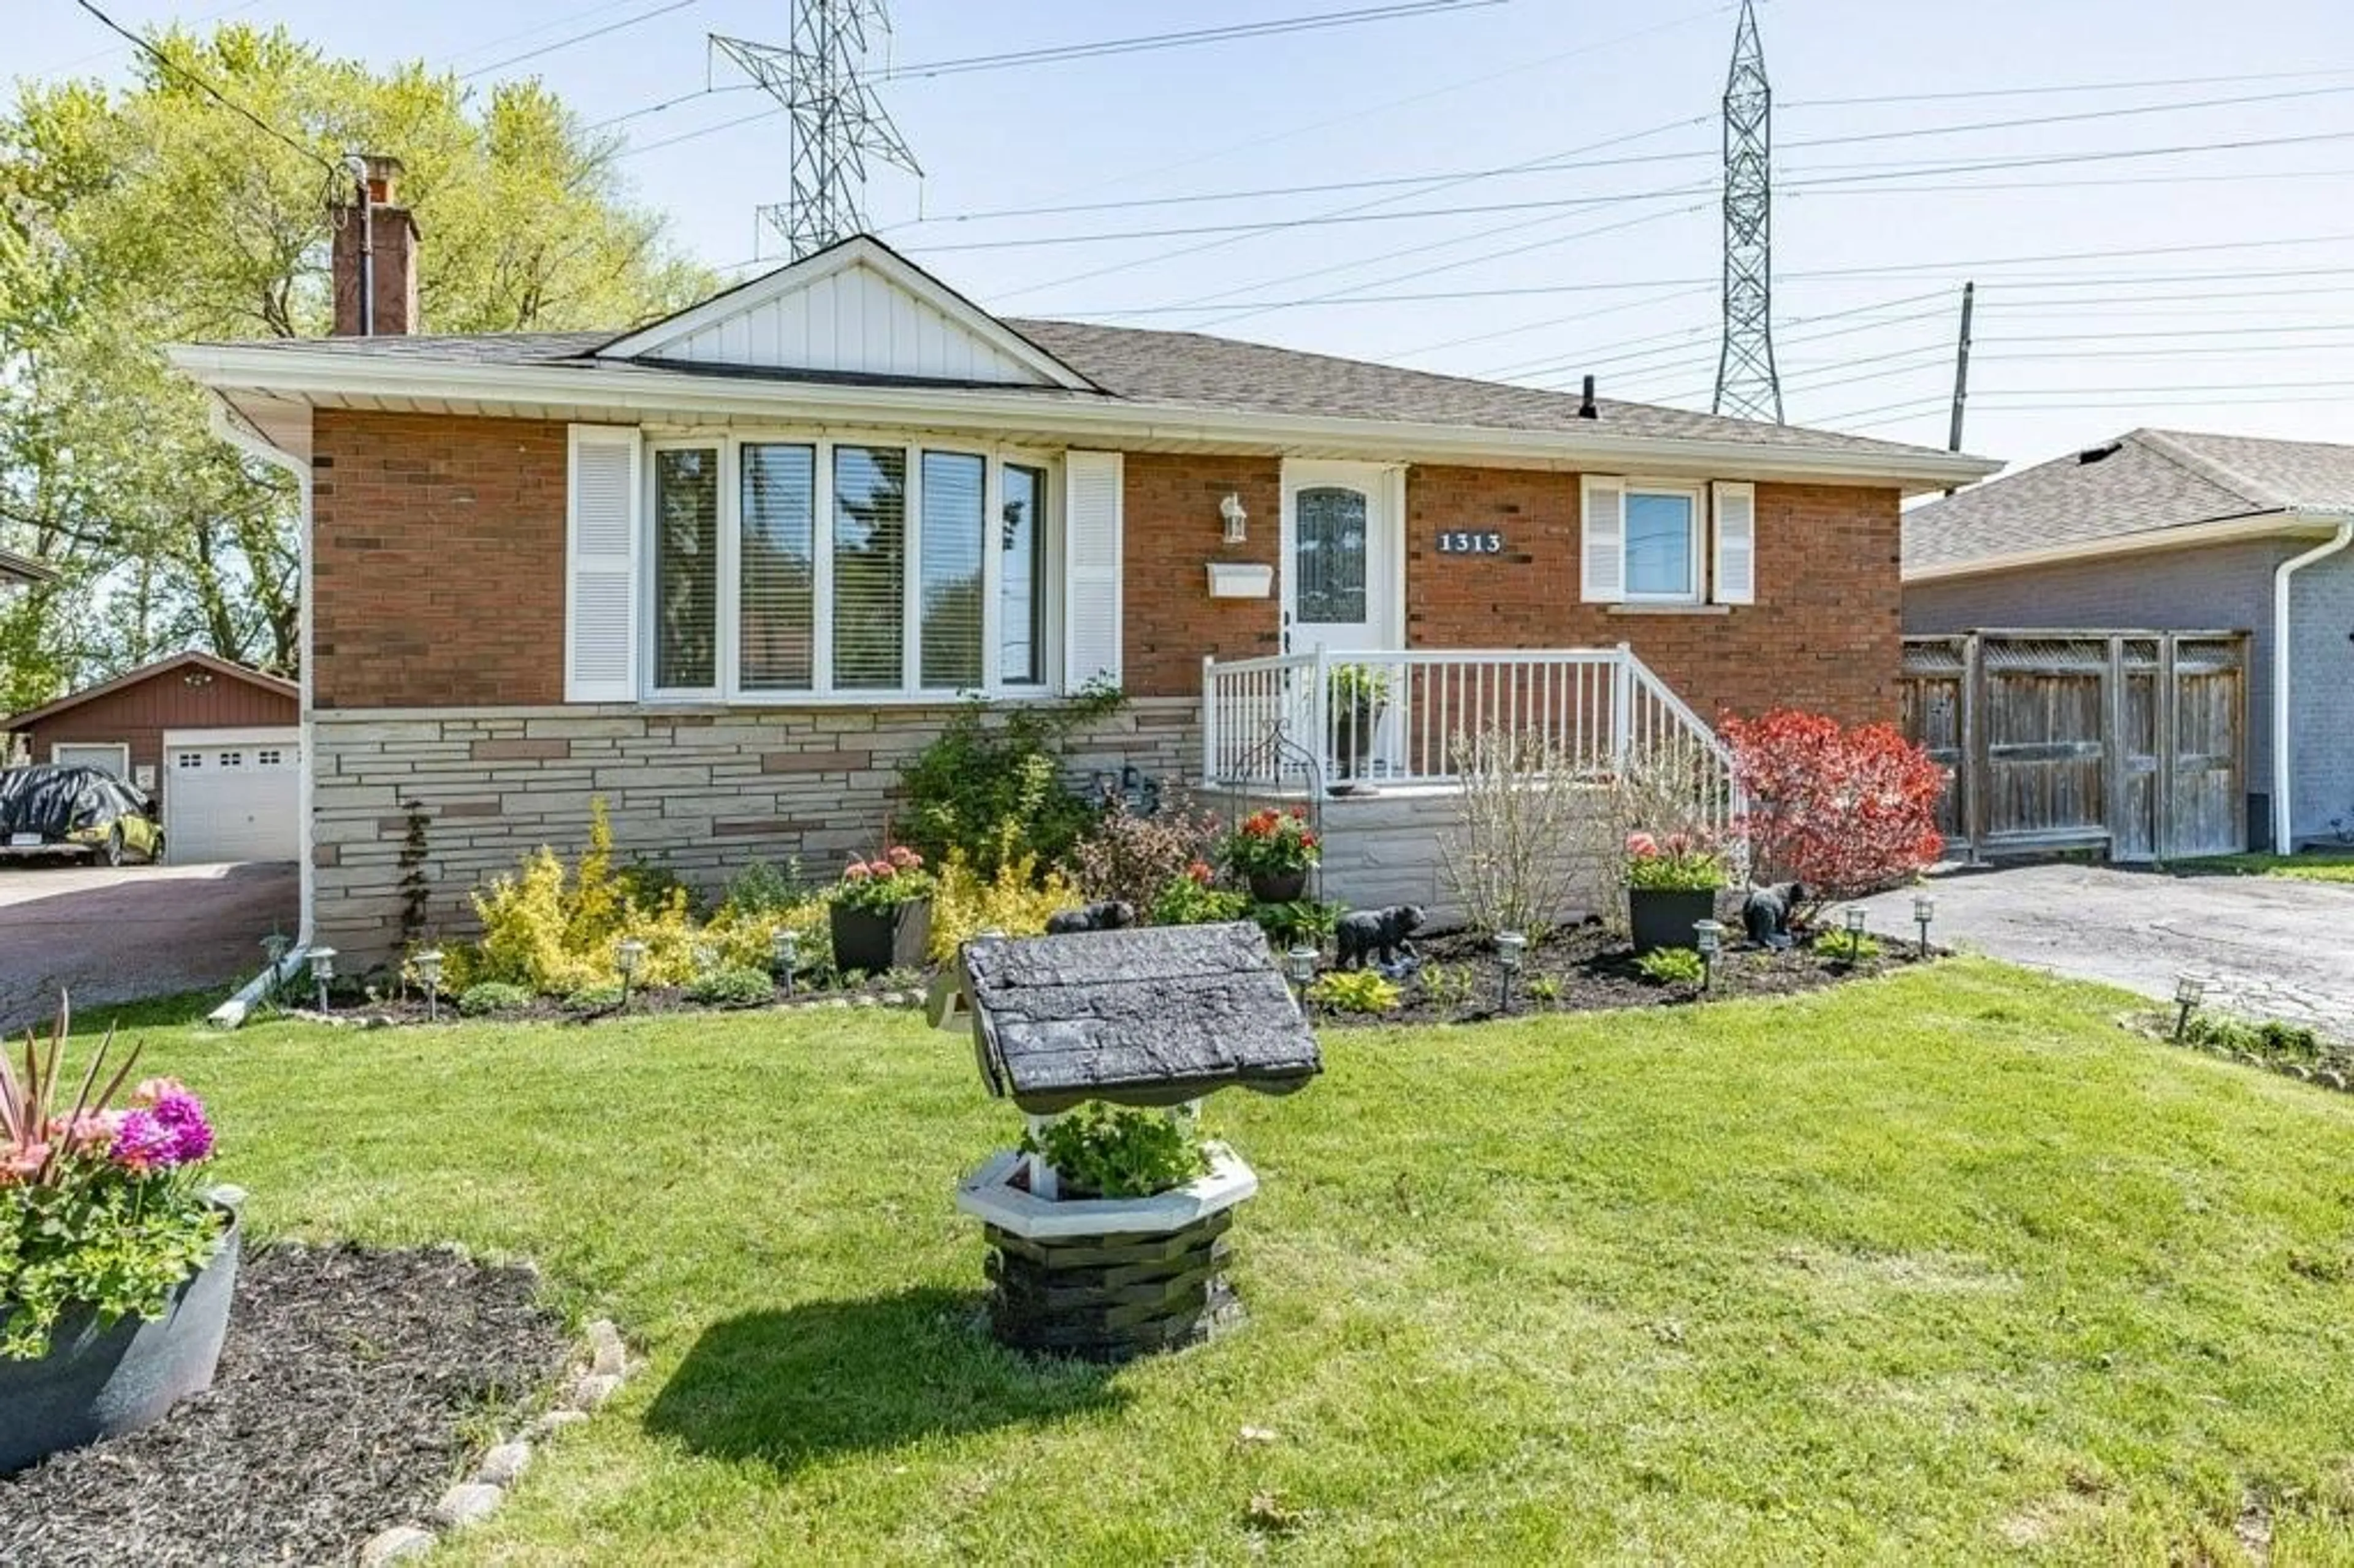 Home with brick exterior material for 1313 FISHER Ave, Burlington Ontario L7P 2L5